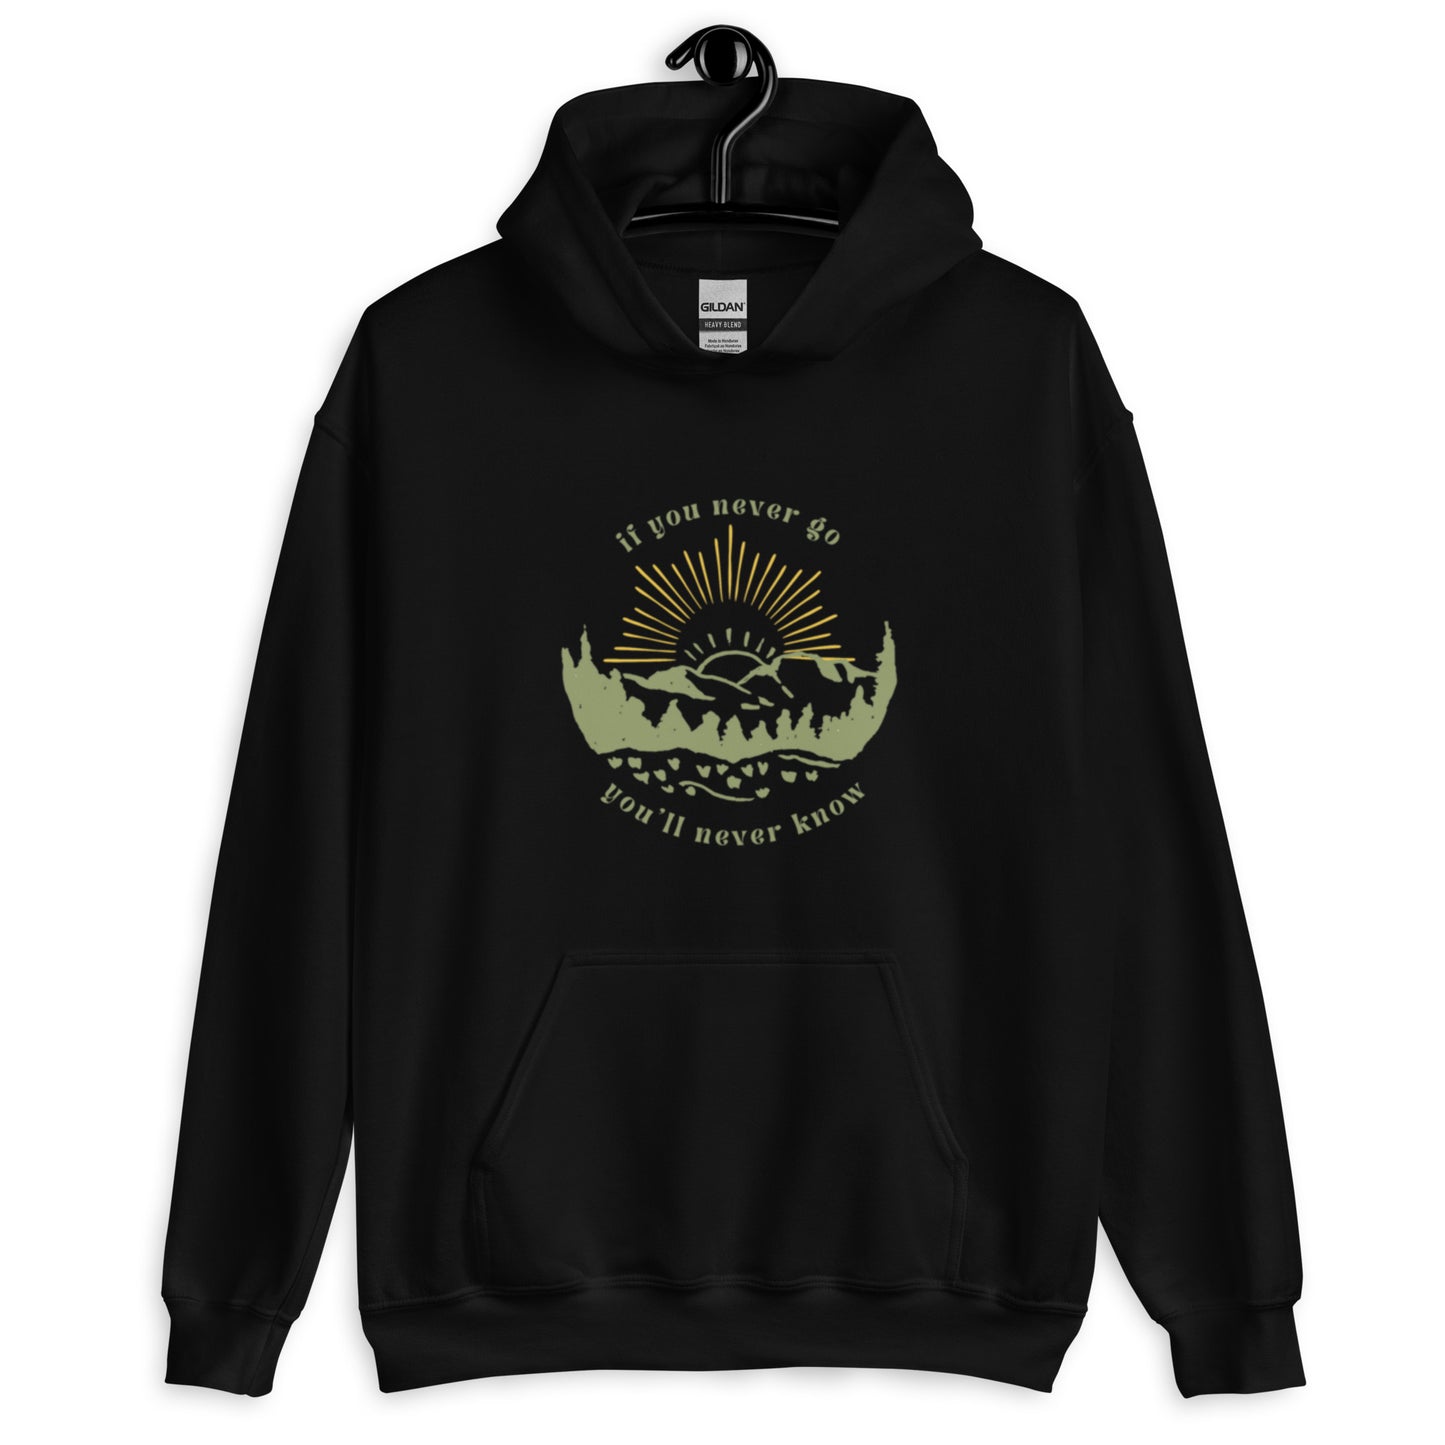 "if you never go" heavy hoodie